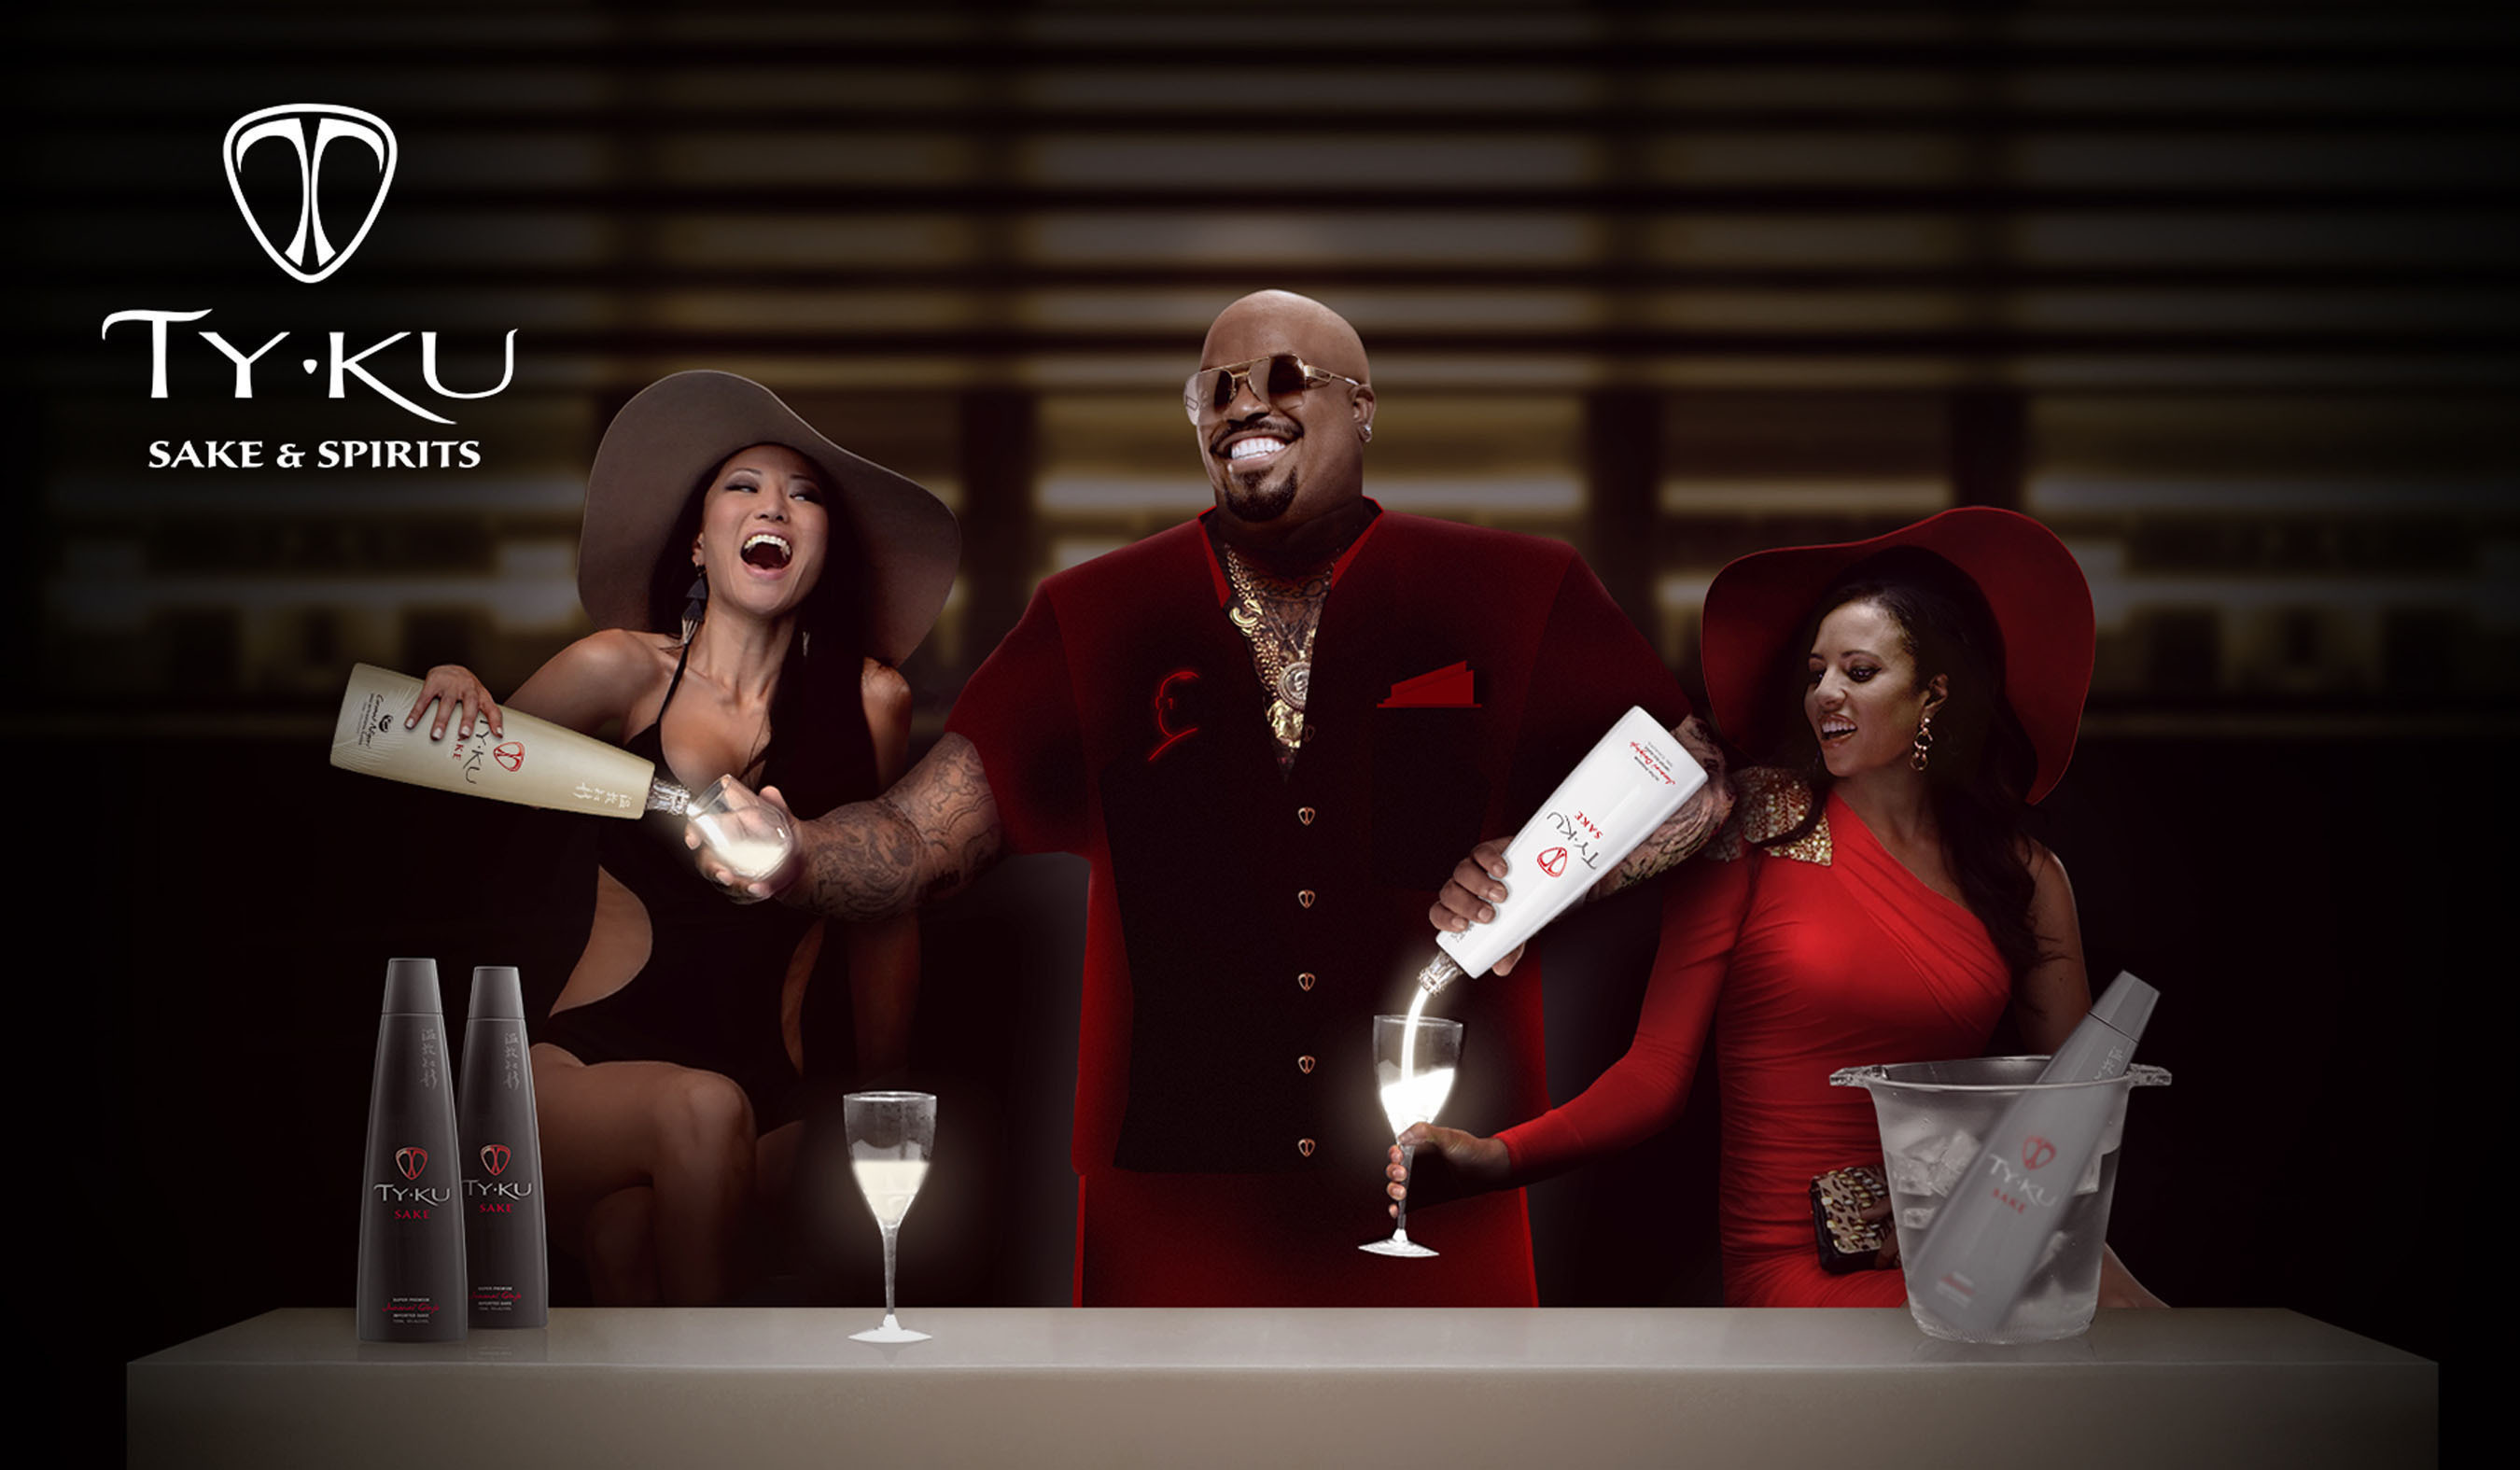 TY KU Sake & Spirits Launches First Ever US Sake Commercial Starring Co-owner CeeLo Green With The "SHARE ON" Campaign